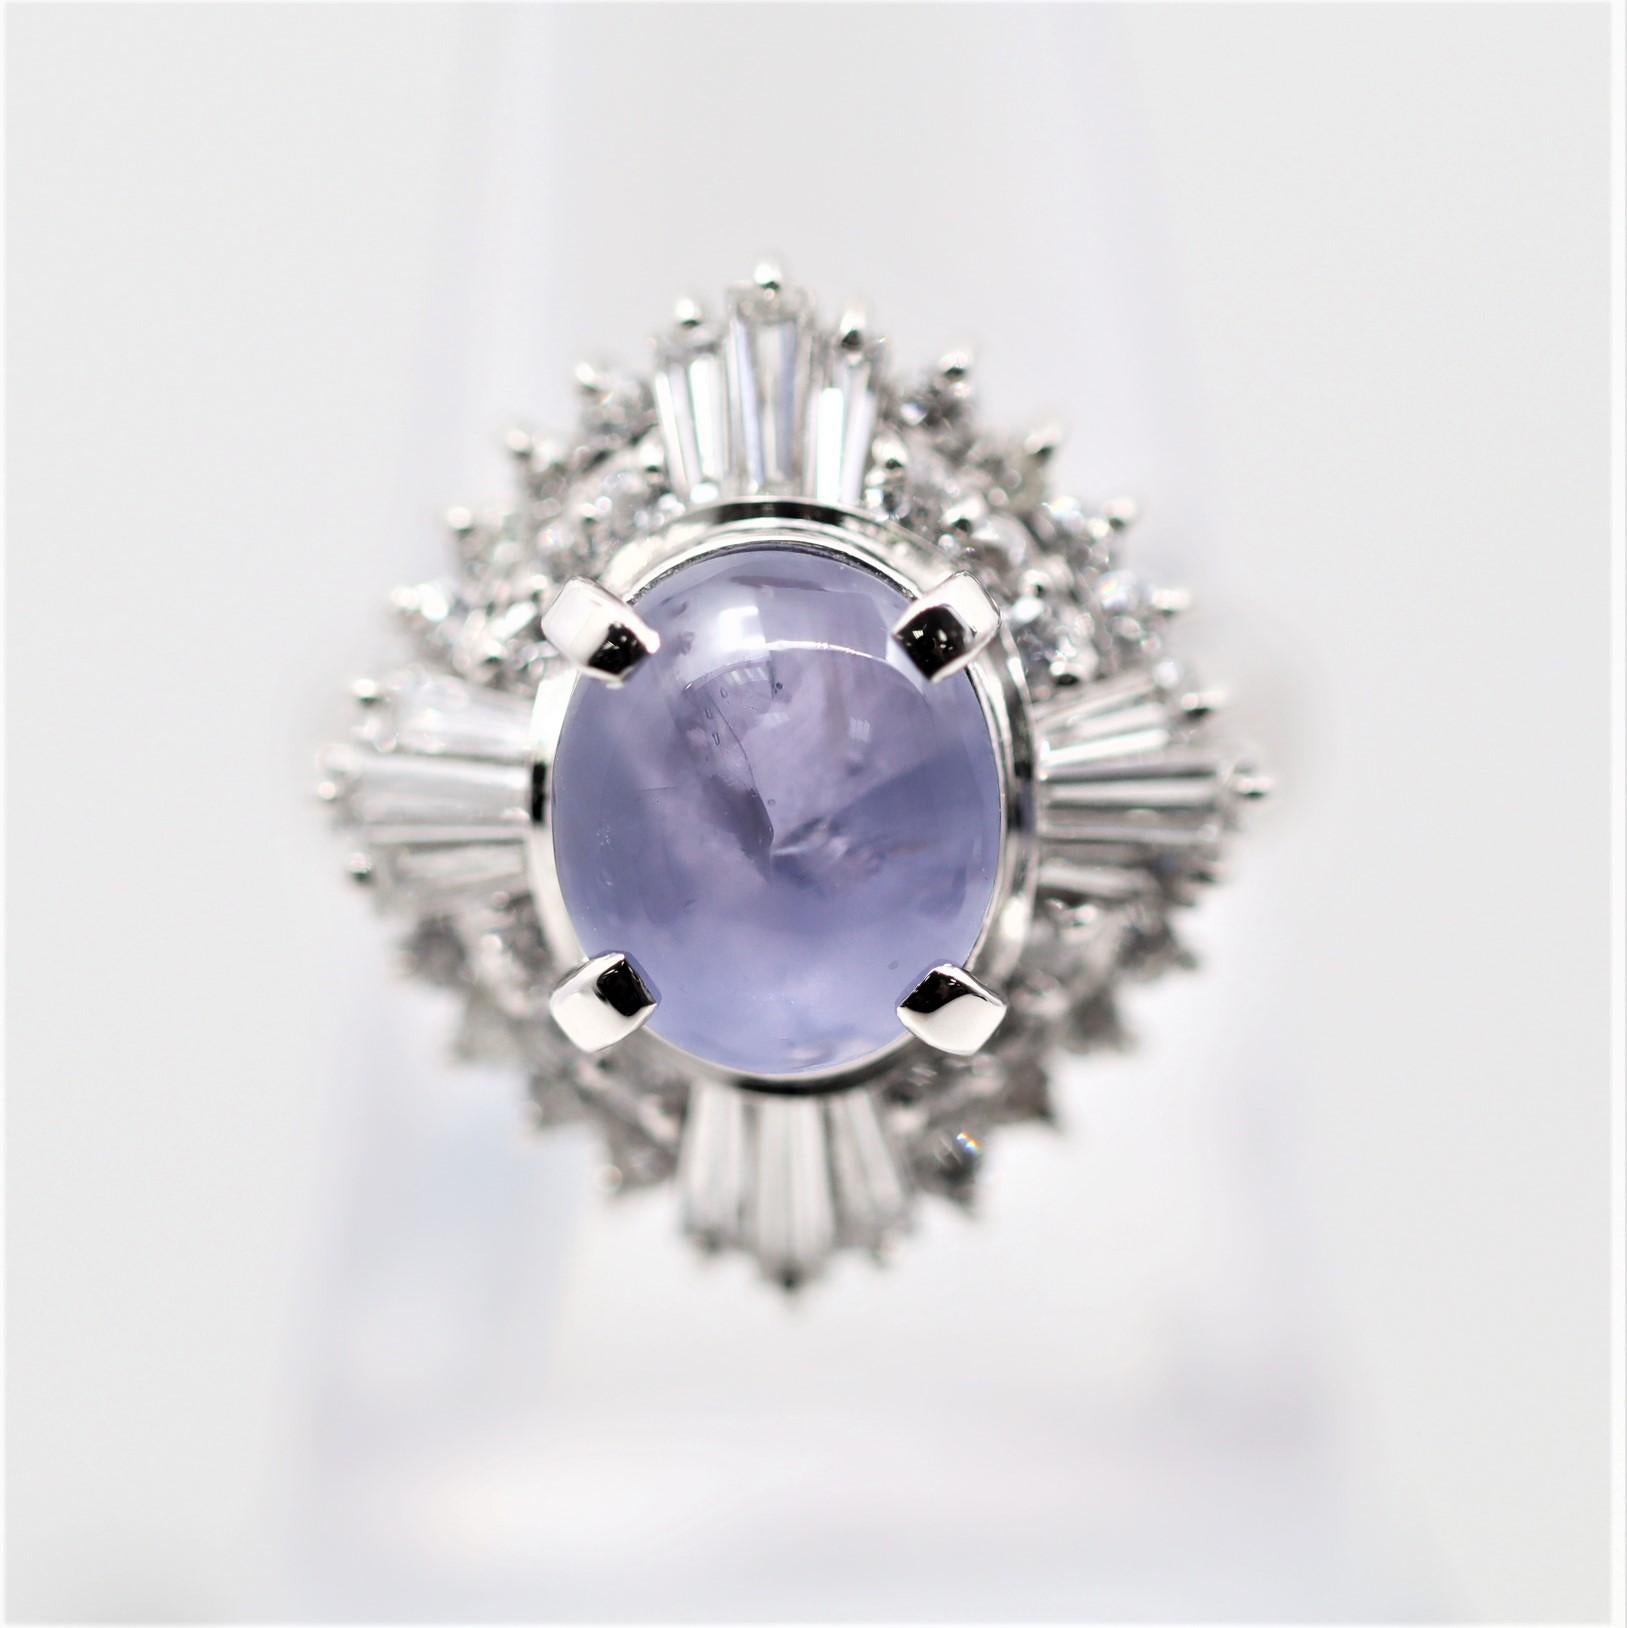 Be the star of your world! This lovely ring features a 5.33 carat star sapphire with a bright and pleasing lavender color. When a light shines on the top of the stone a 6 rayed star can be seen, known as asterism. It is complemented by 1.45 carats